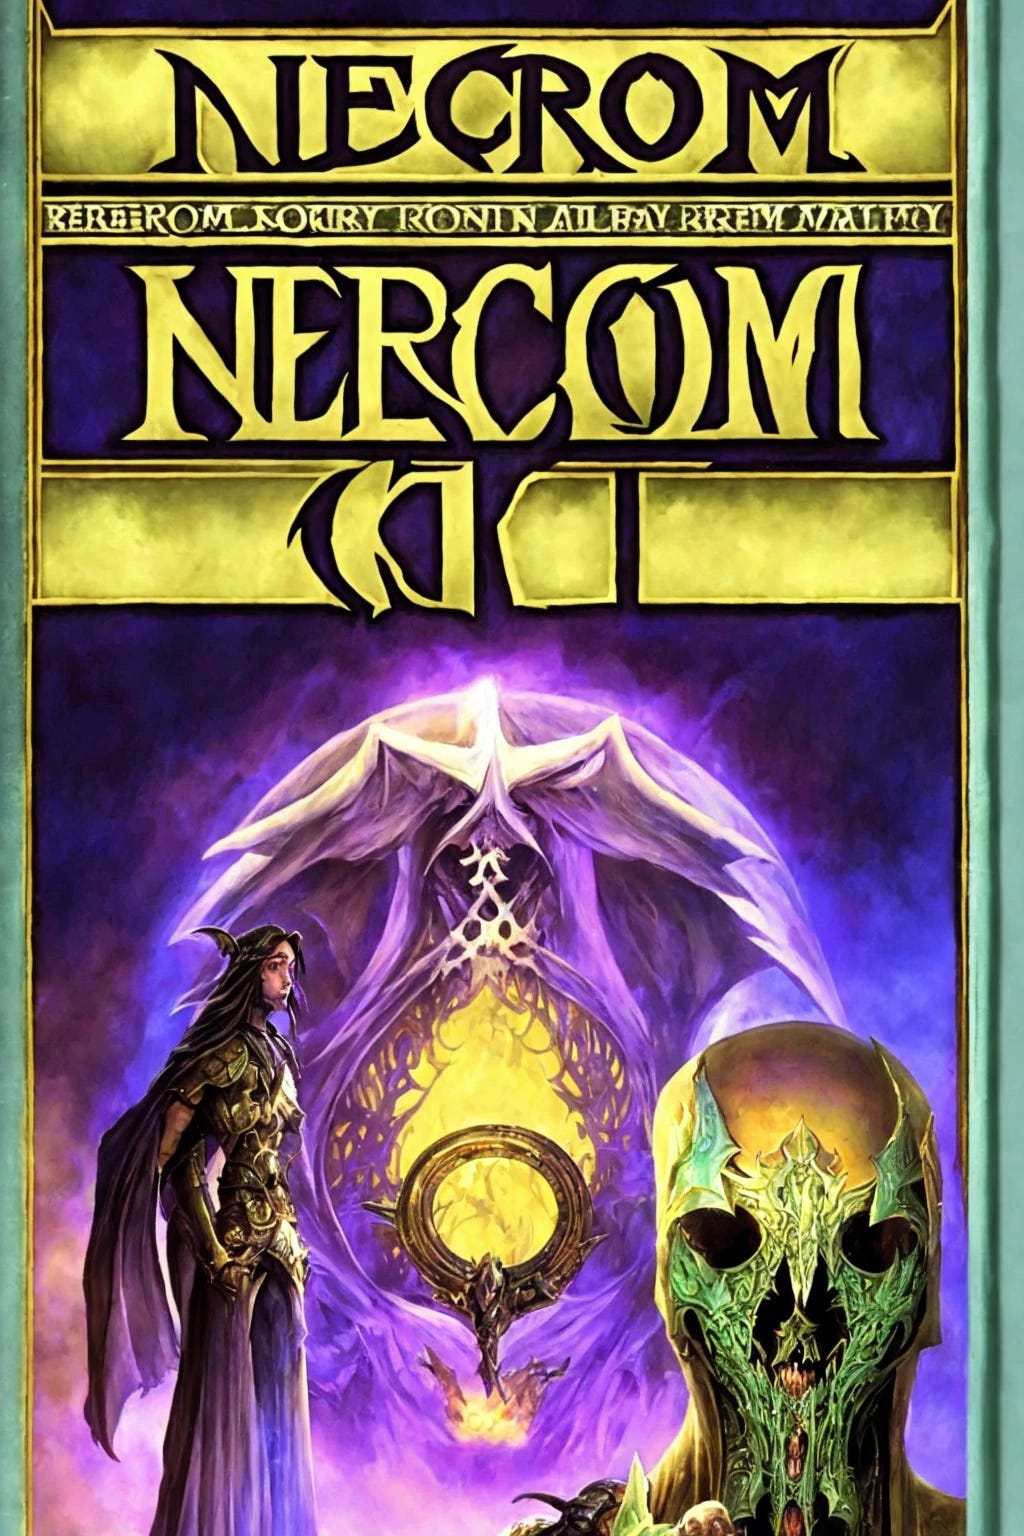 a_book_cover_of_necrom__picture_clearly_visible__cg_society.webp